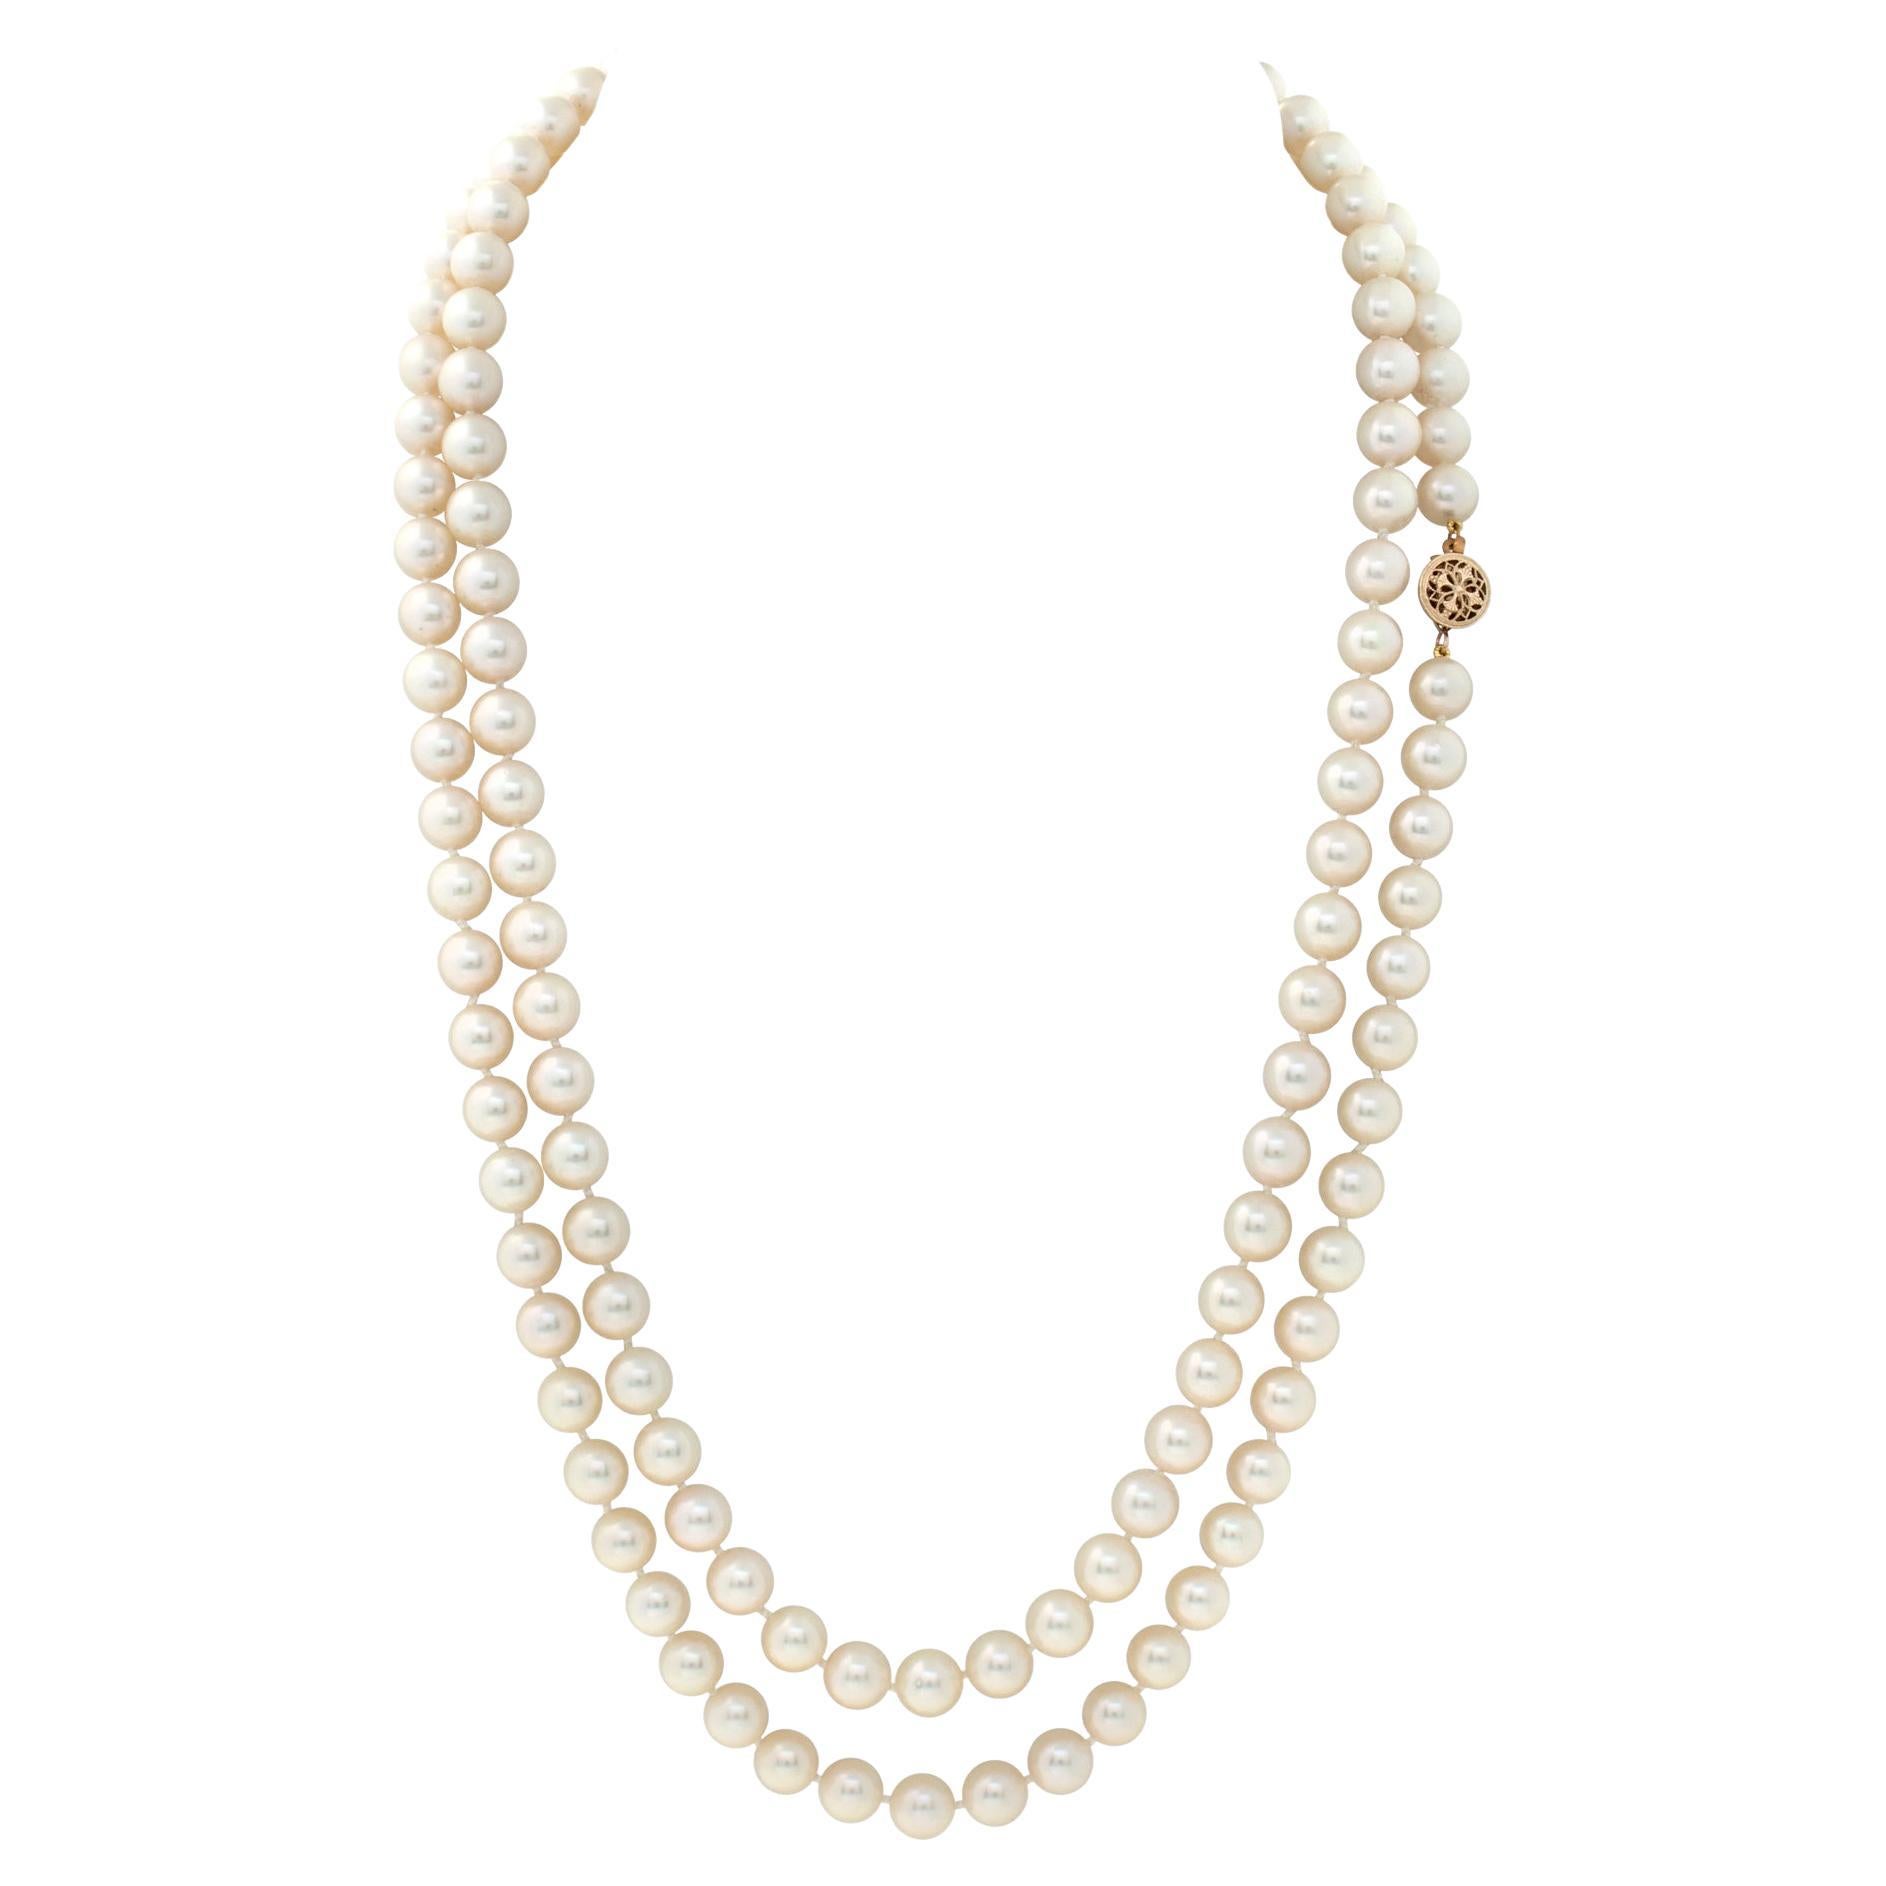 Opera Length Strand Of Akoya Pearl Necklace With A Yellow Gold Clasp